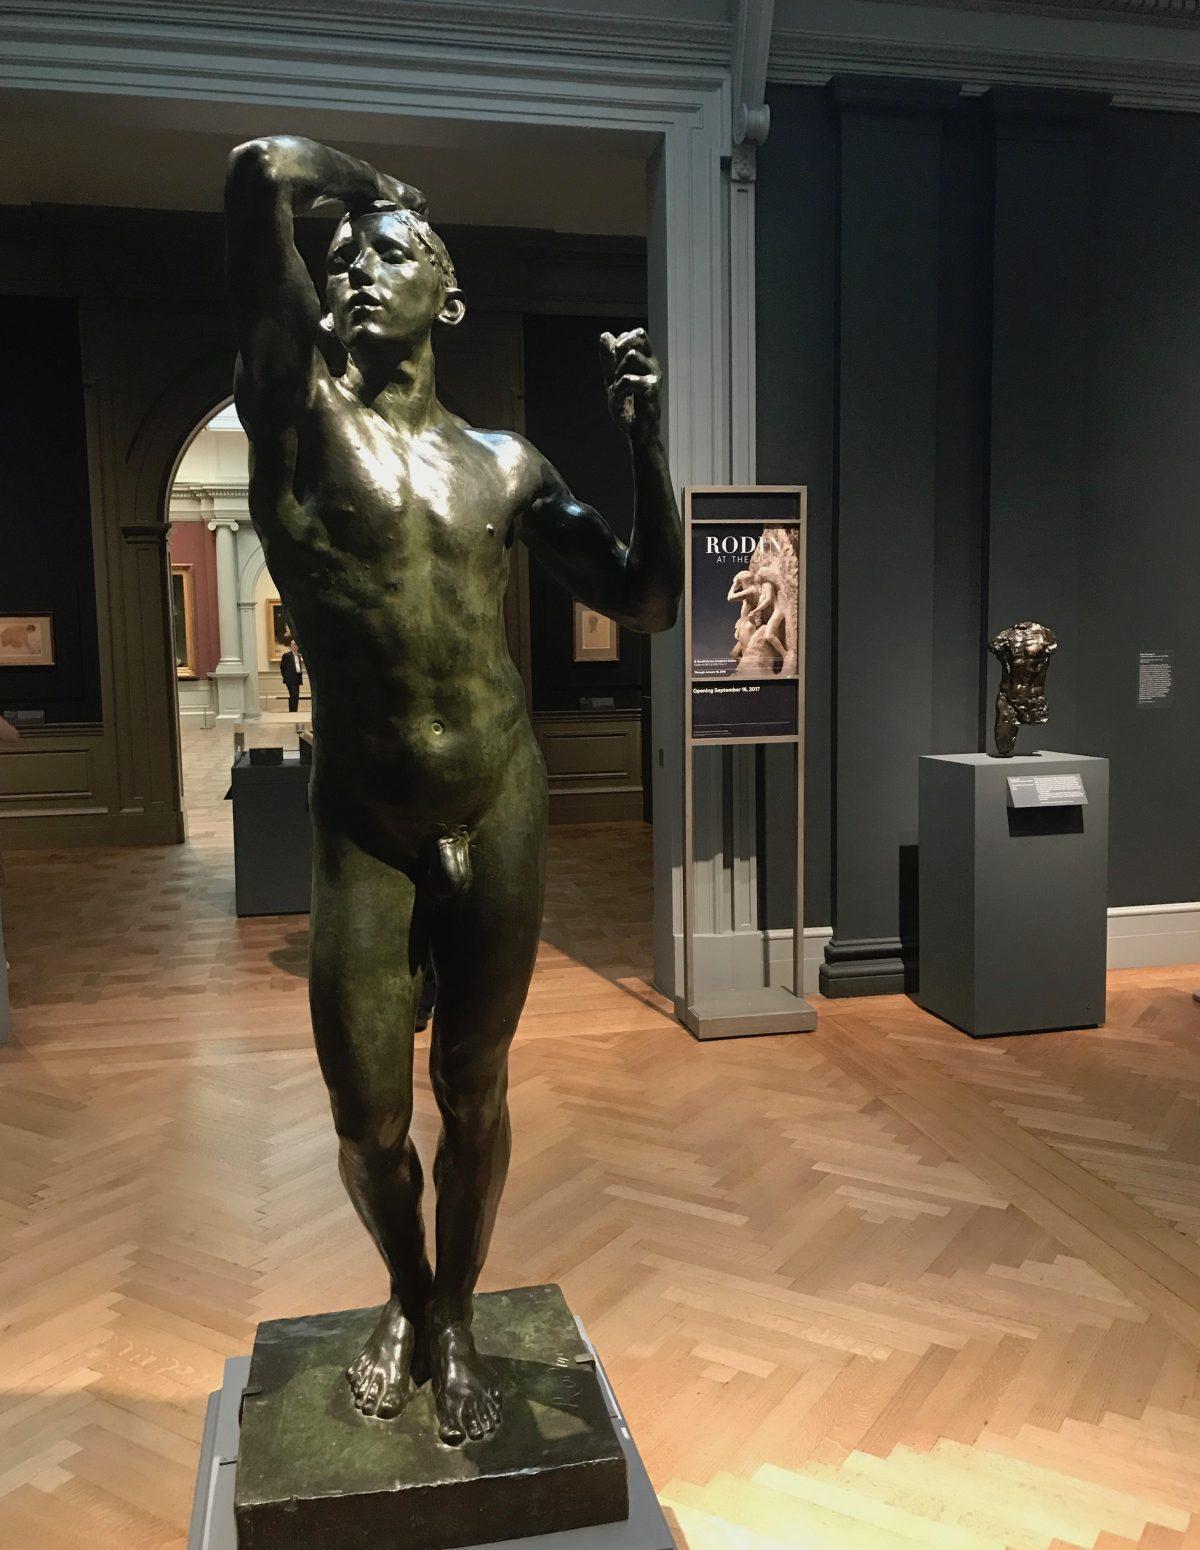 “The Age of Bronze” by Auguste Rodin. Cast by Alexis Rudier, modeled 1876, cast circa 1906, bronze. The Metropolitan Museum of Art, gift of Mrs. John W. Simpson, 1907. (Background) “Torso” by Auguste Rodin. Modeled circa 1877–78, cast 1979 in bronze. (Milene Fernandez/The Epoch Times)